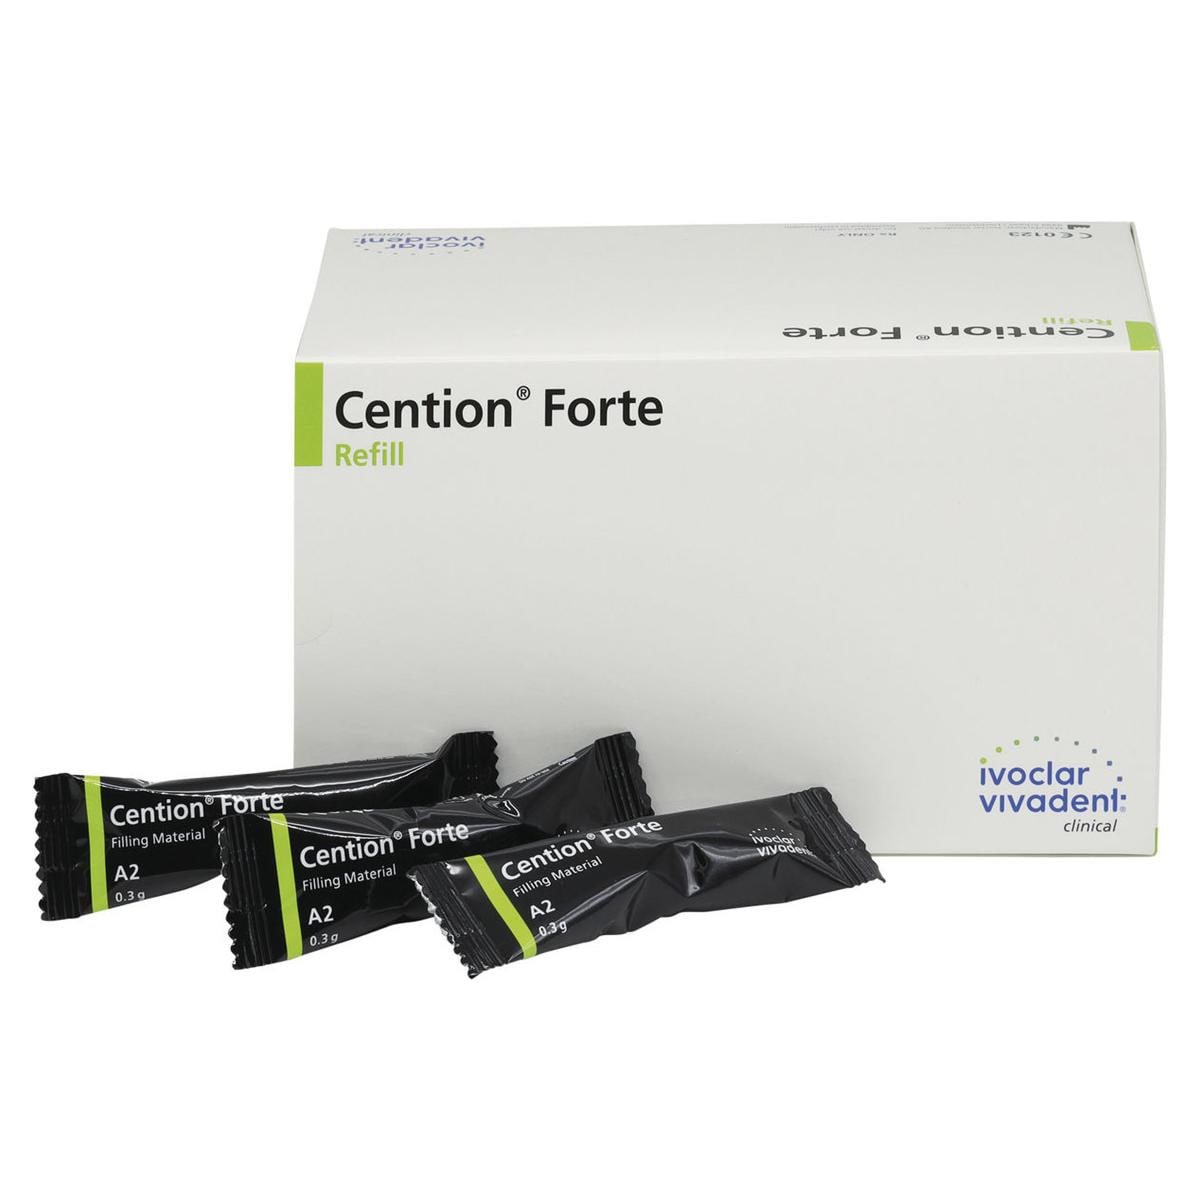 Cention Forte - recharge - A2, 50x 0,3 g capsules